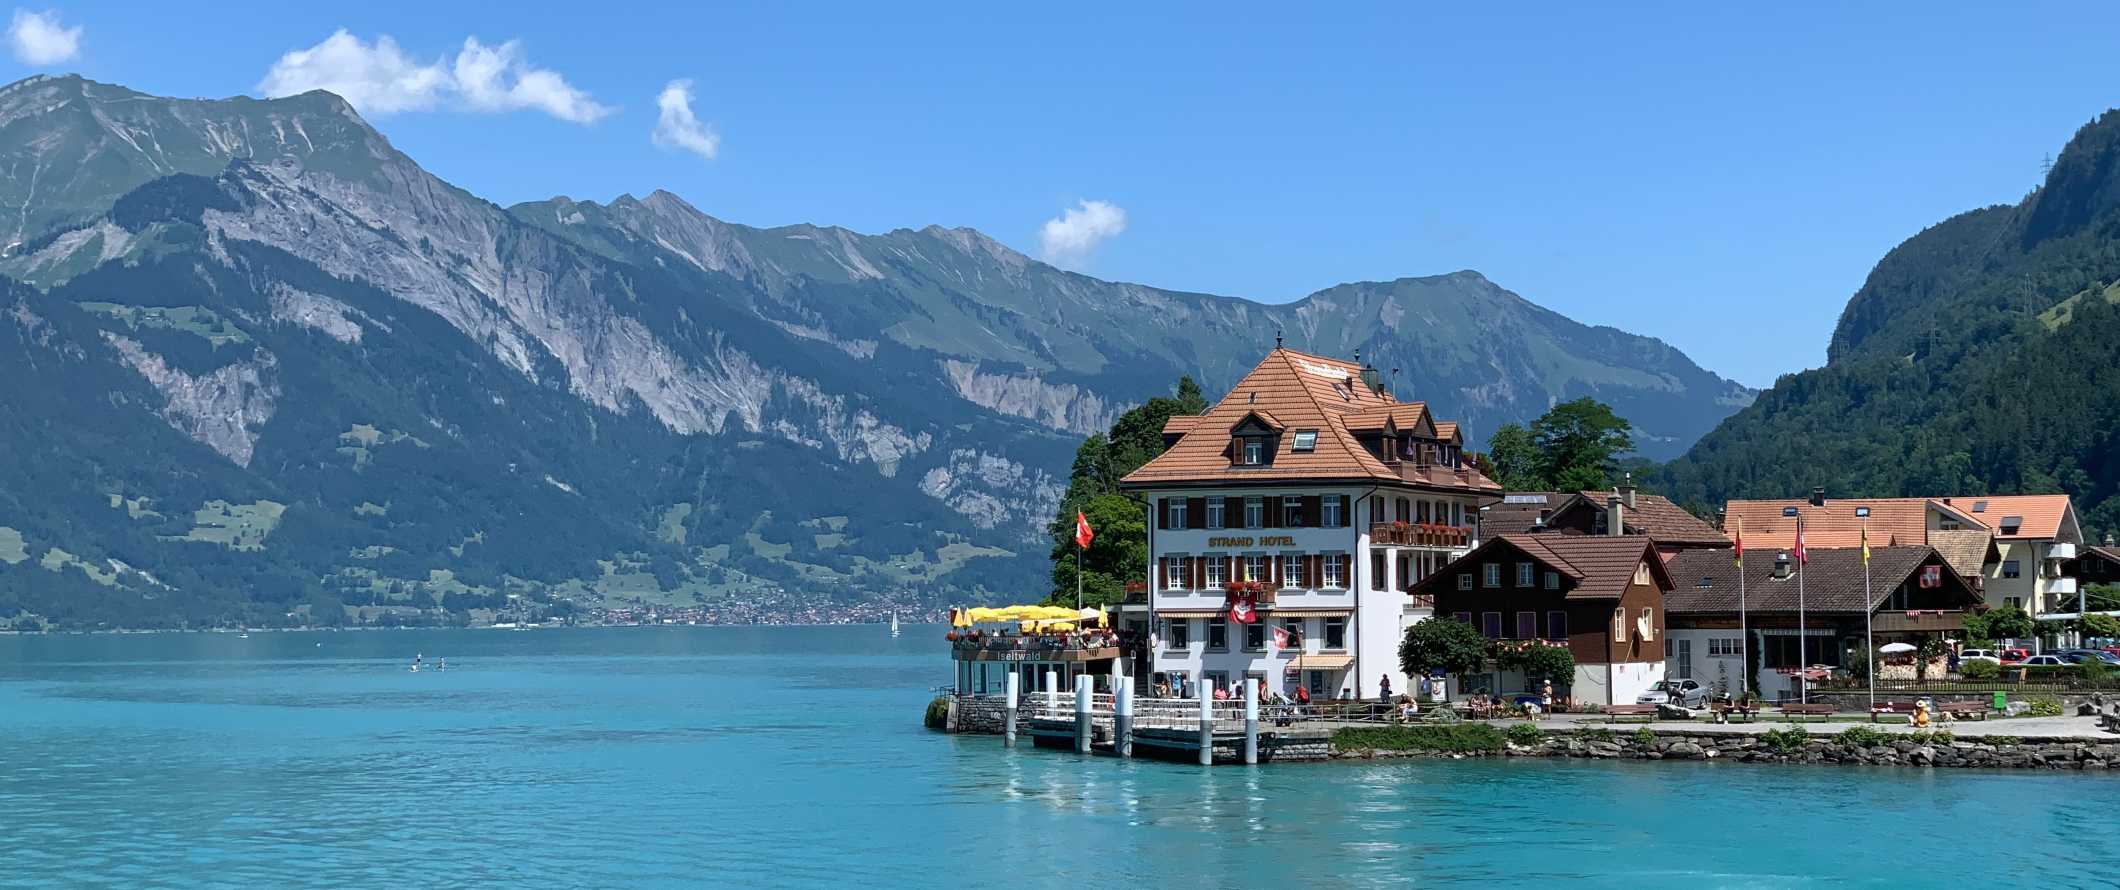 A hotel on the edge of a bright blue lake surrounded by mountains in Interlaken, Switzerland